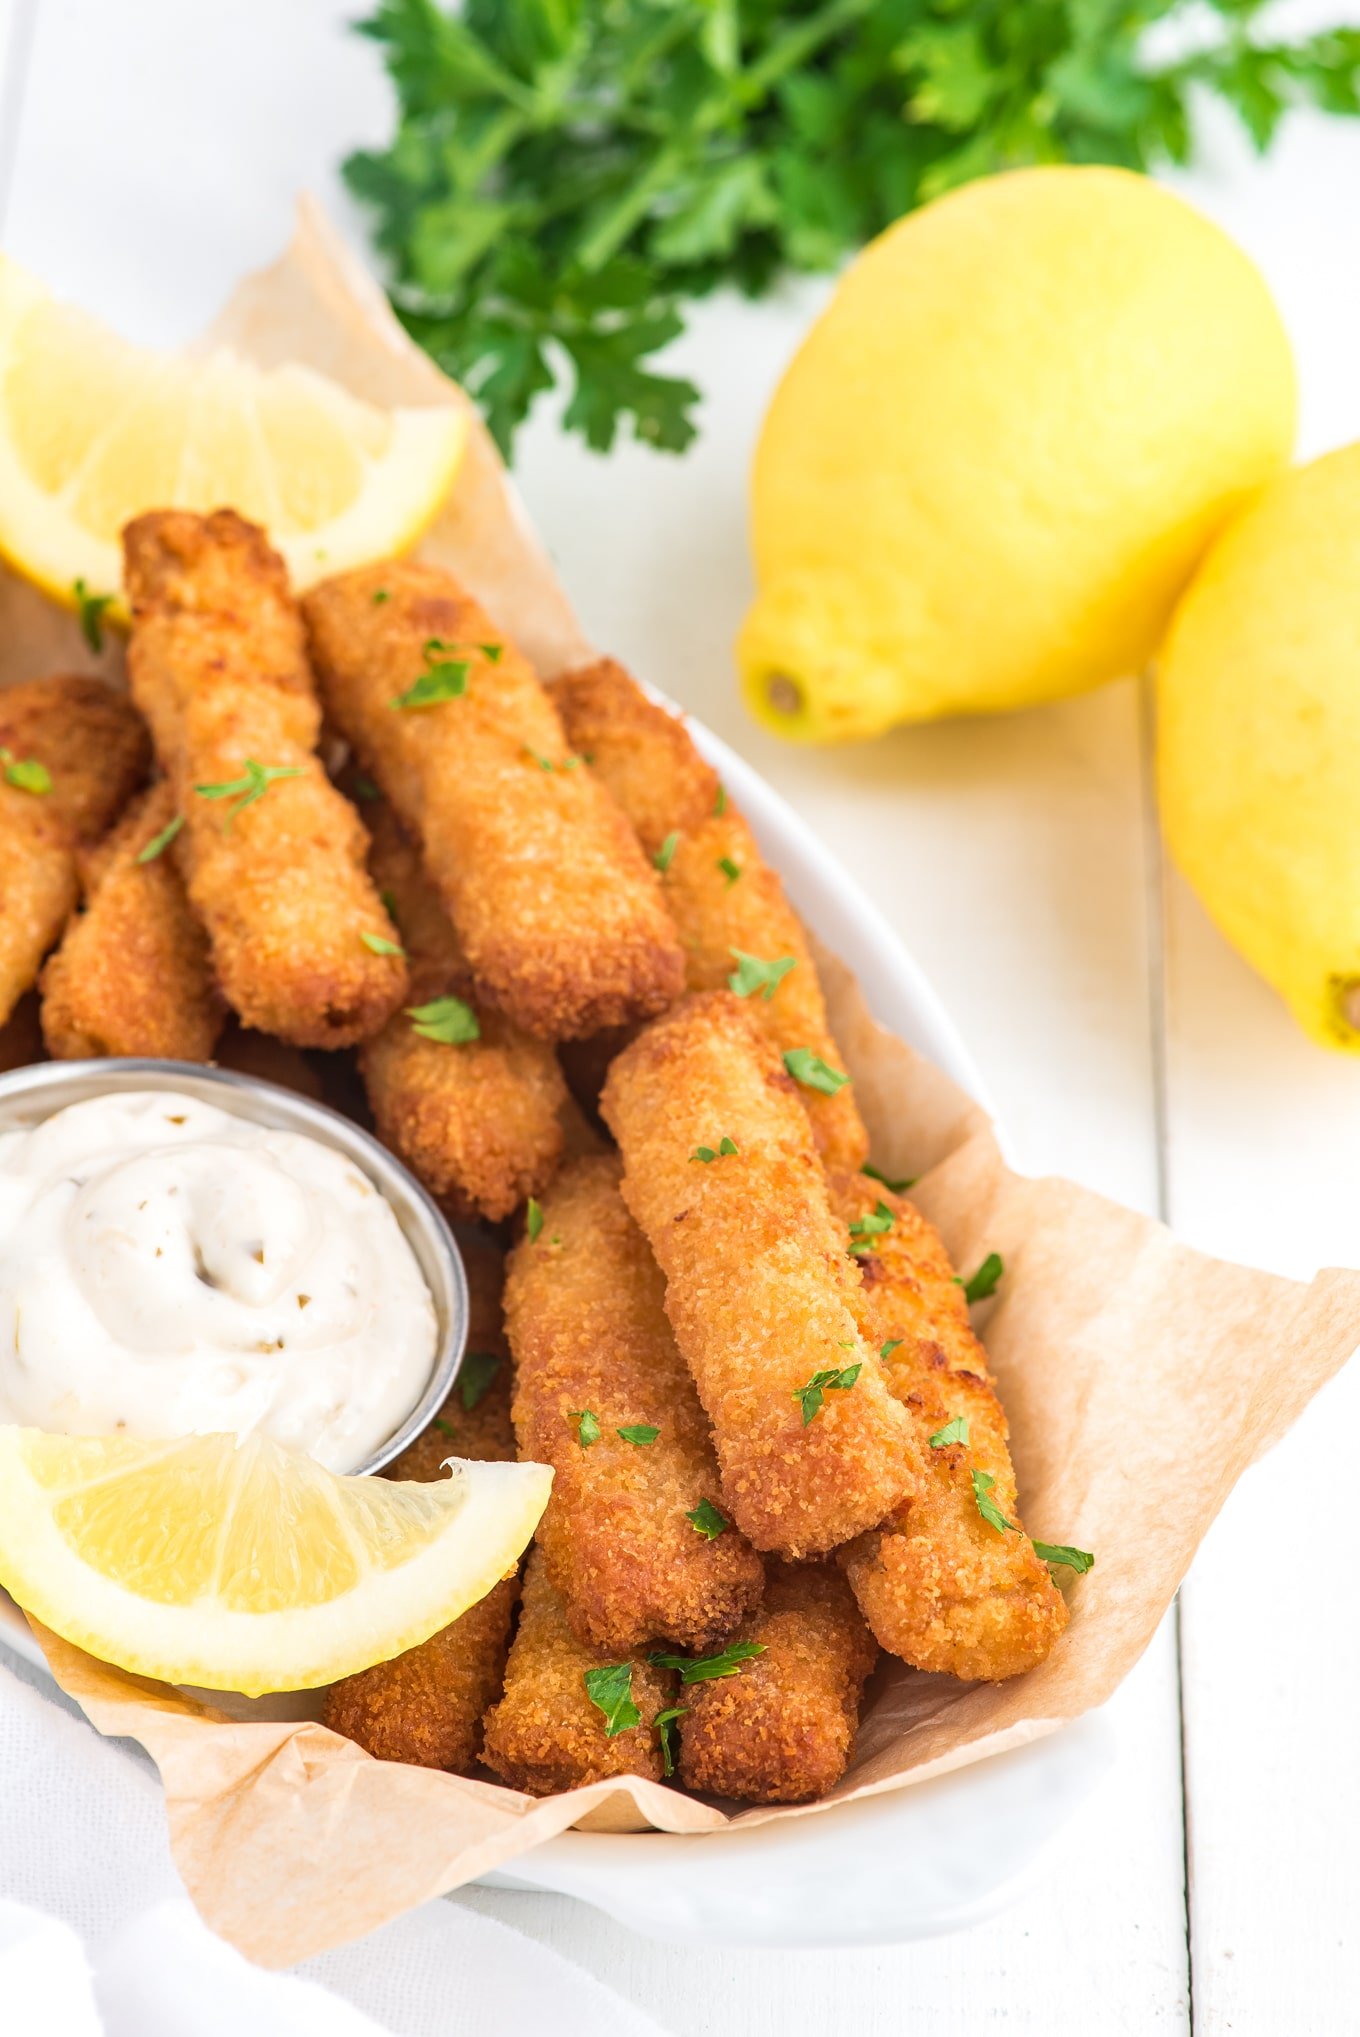 A basket of fish sticks in air fryer with lemon wedge and tartar sauce and lemons in the background.